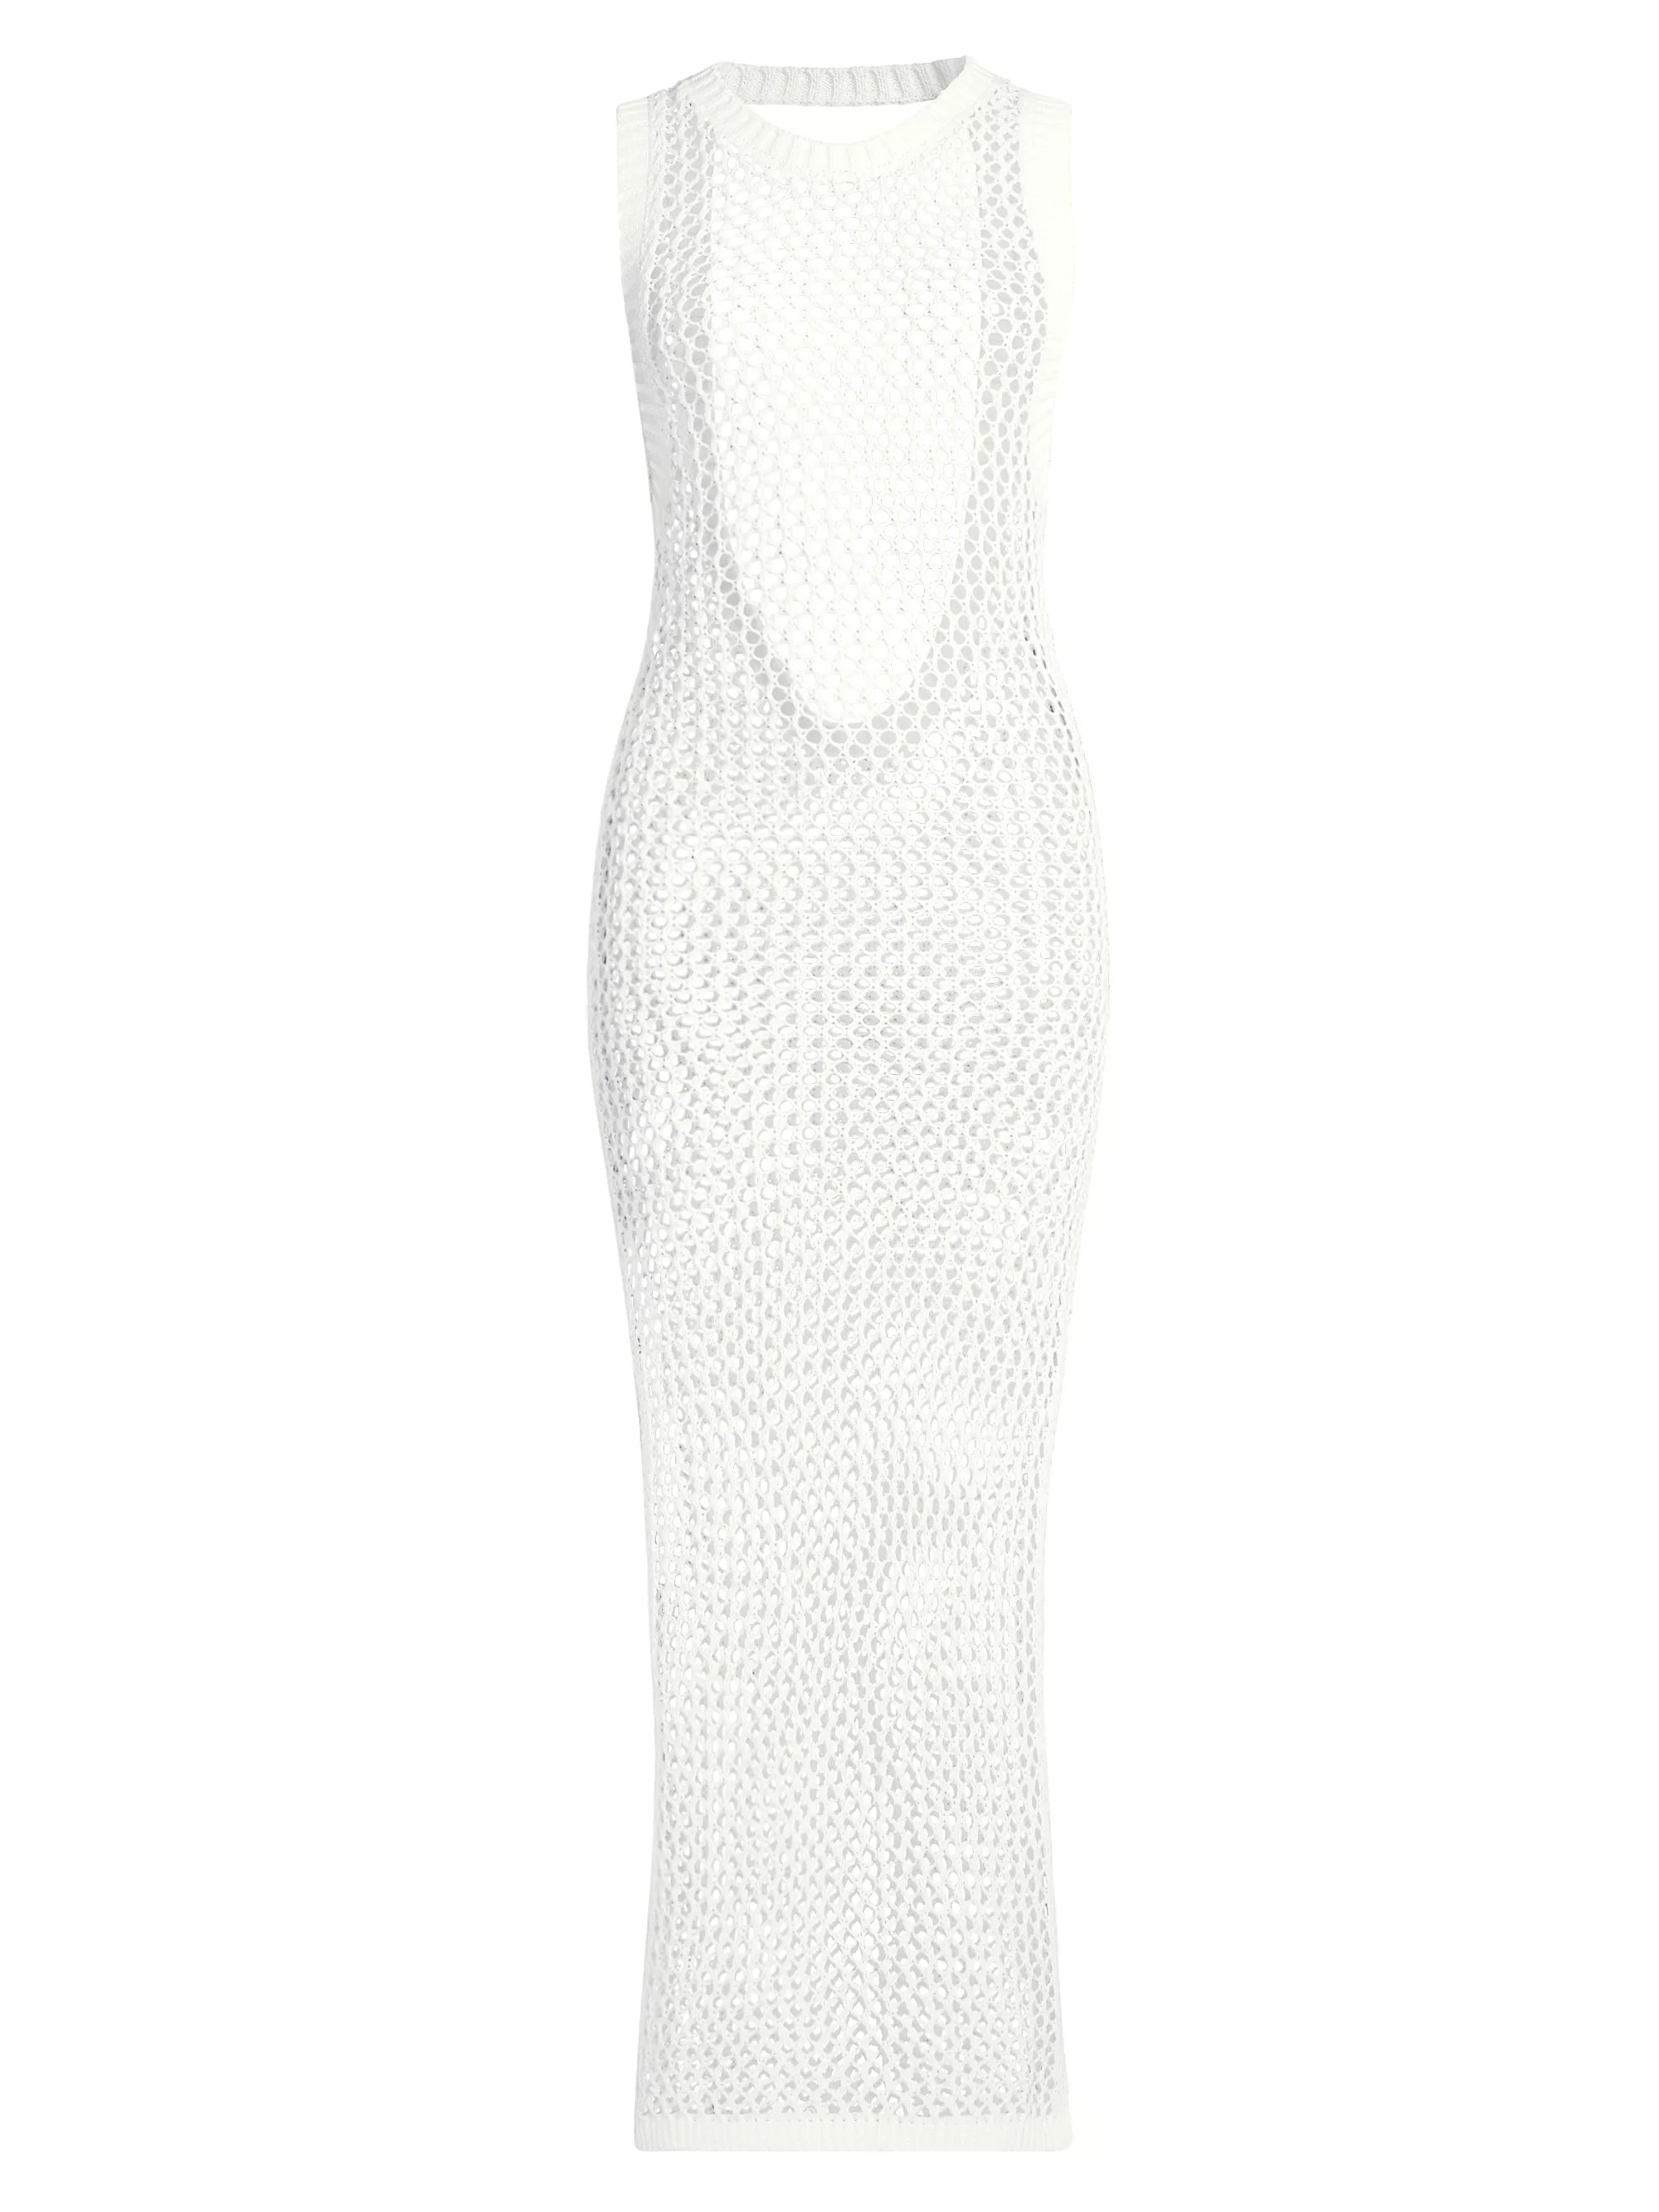 Holly Net Cover-Up Midi-Dress | Saks Fifth Avenue